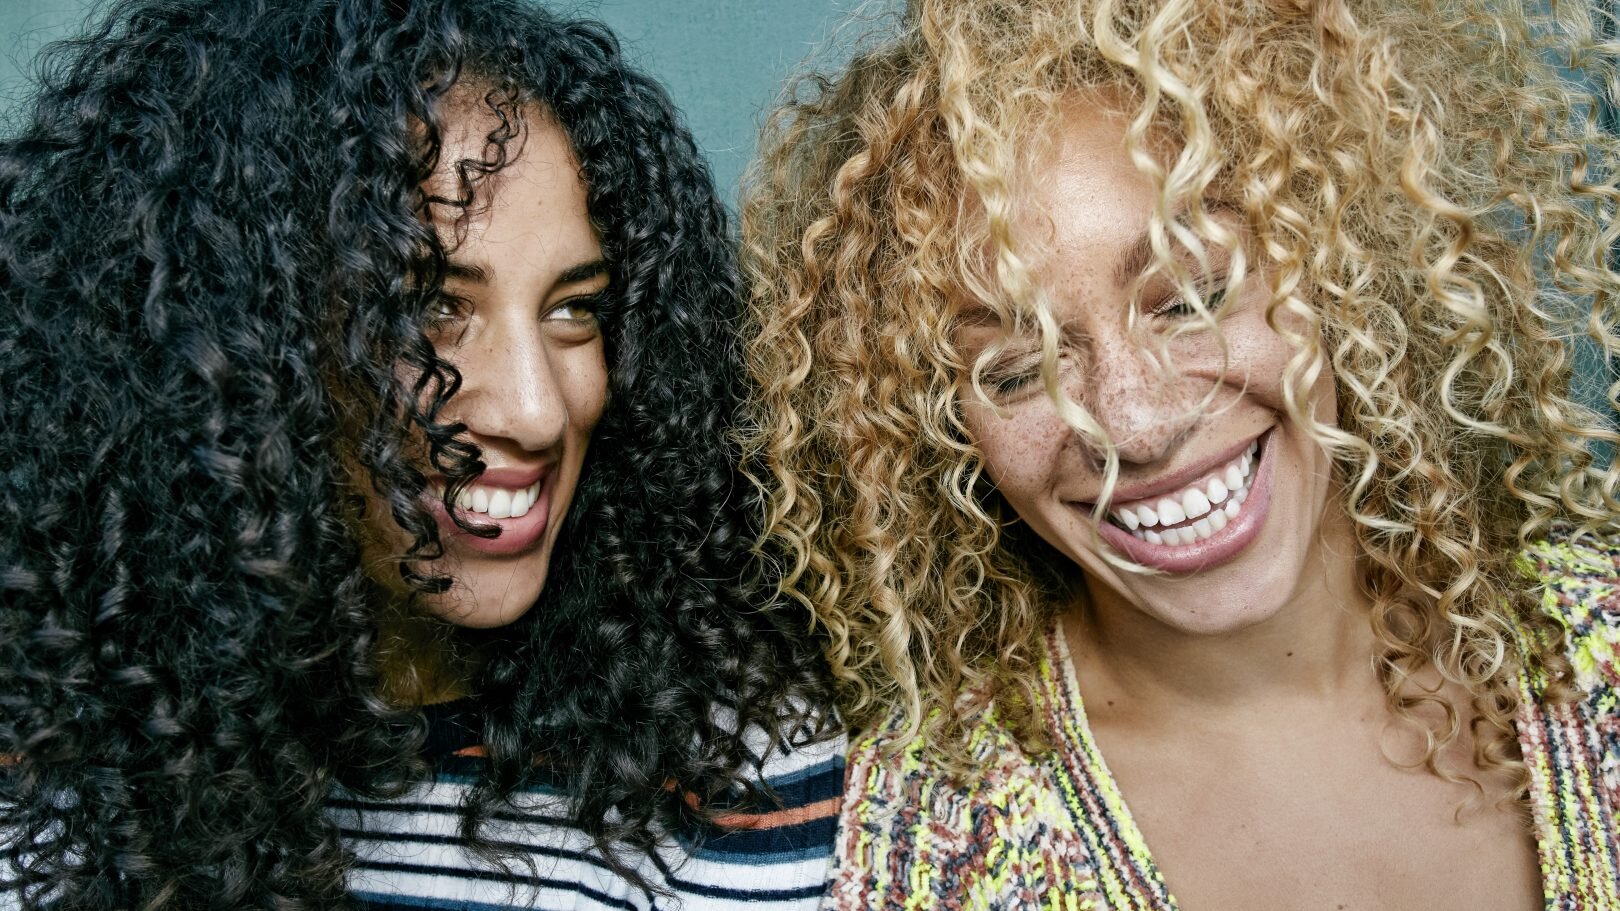 portrait_of_two_young_women_with_long_curly_black_and_blond_hair__smiling_and_laughing_-1620x911.jpeg